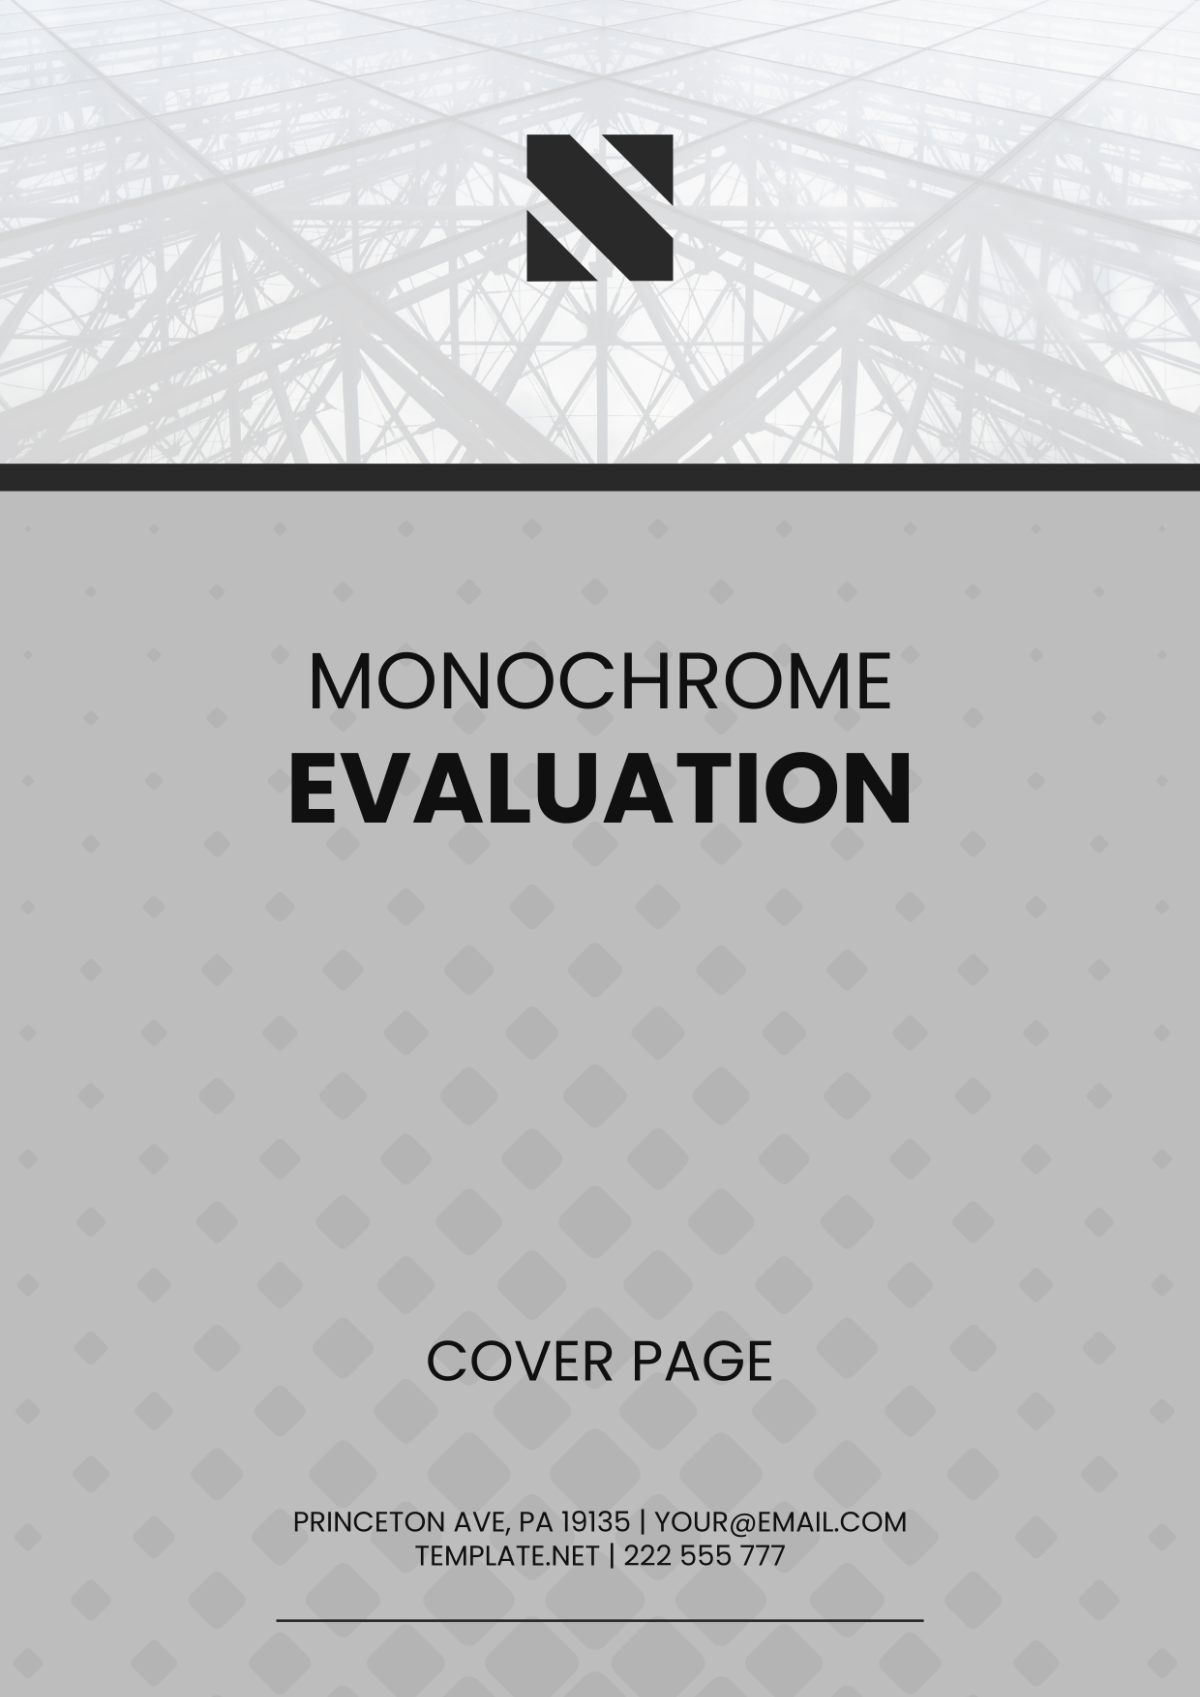 Monochrome Evaluation Cover Page